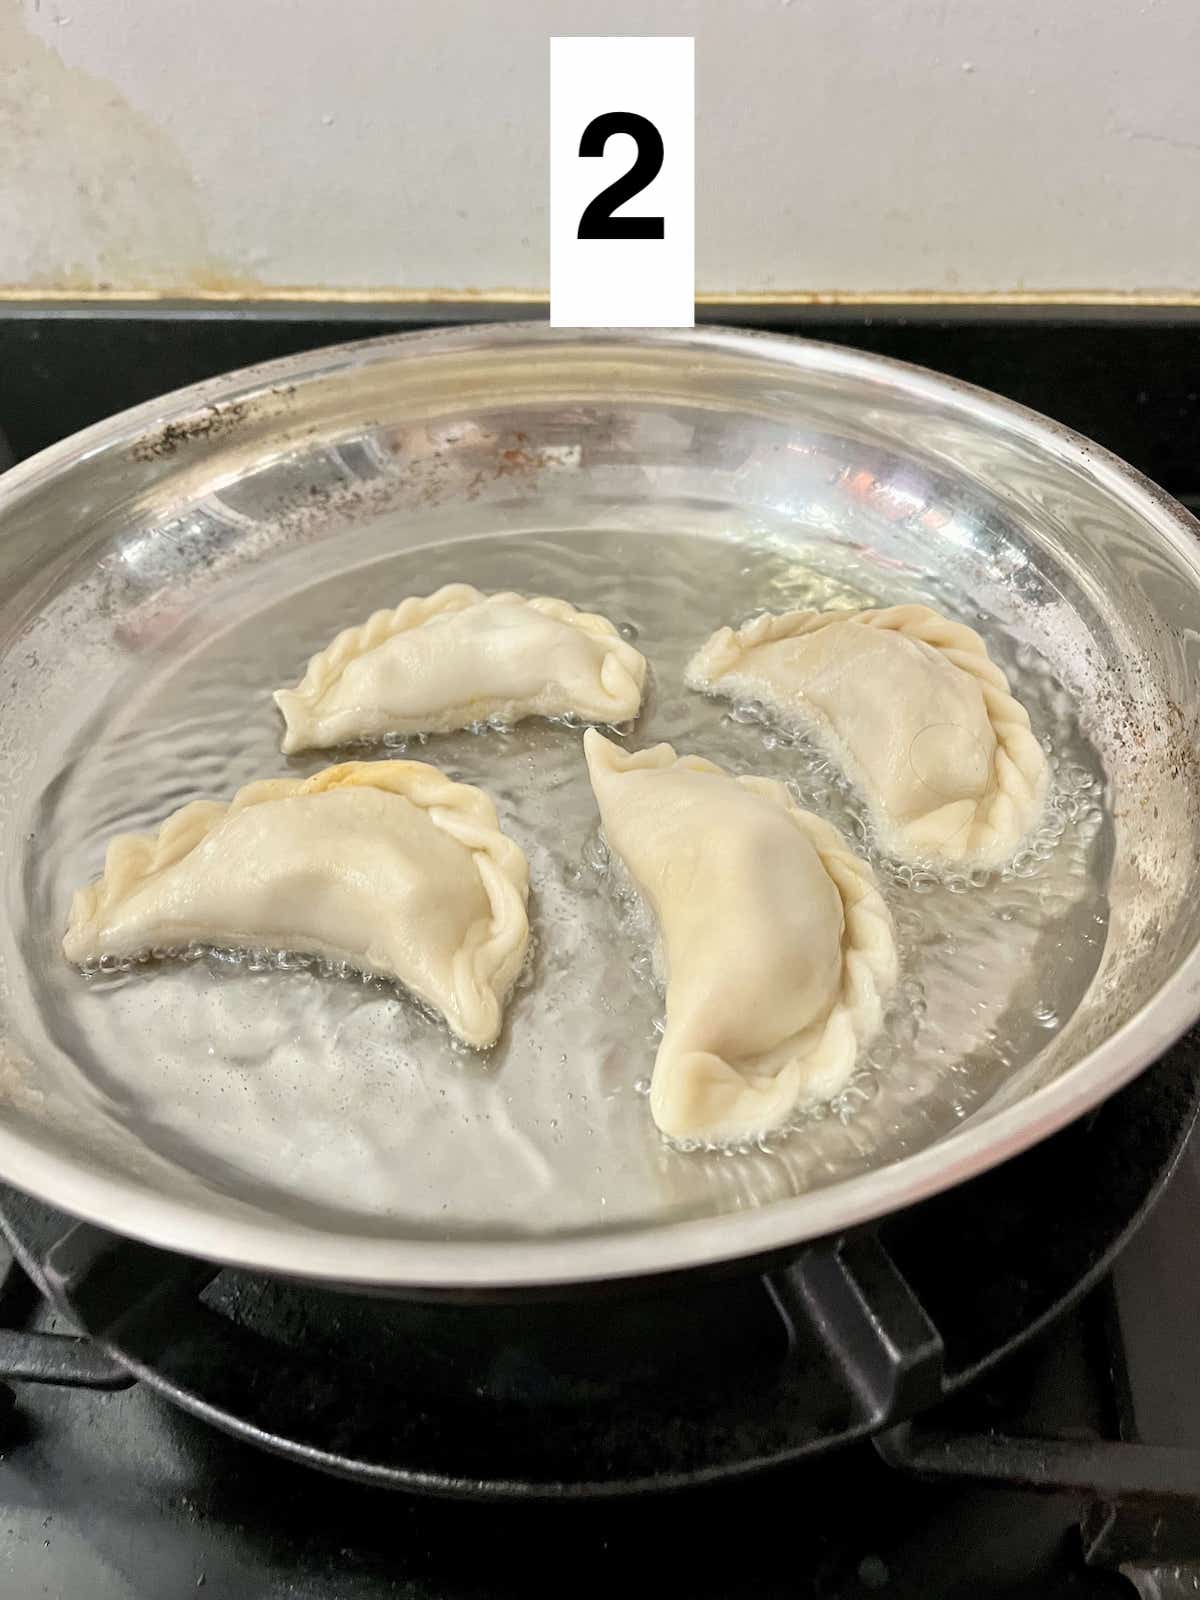 4 curry puffs in a pan of hot oil.